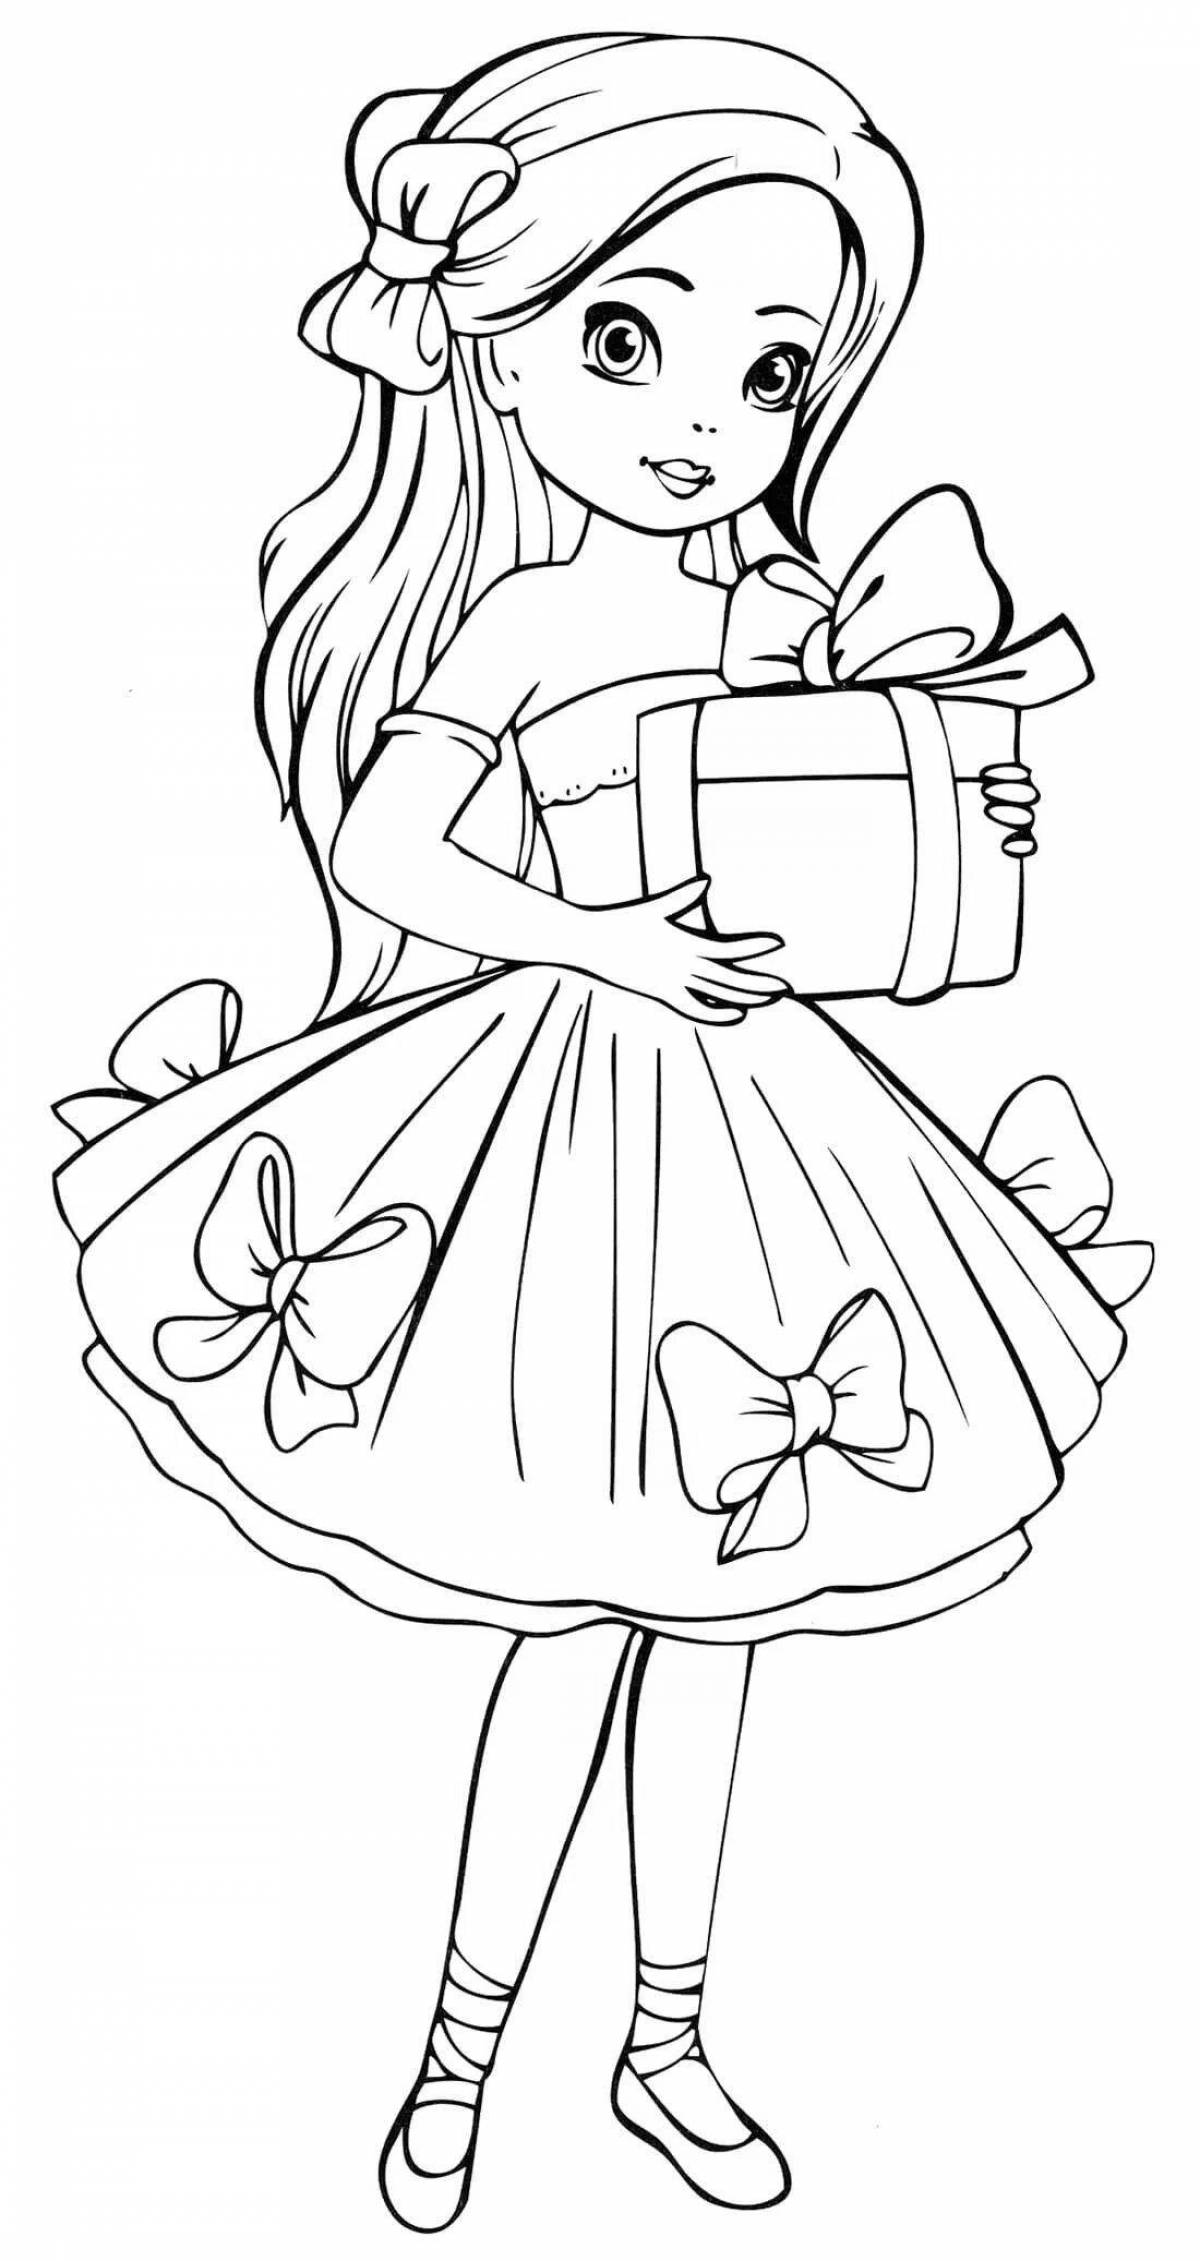 Radiant coloring page gift girls